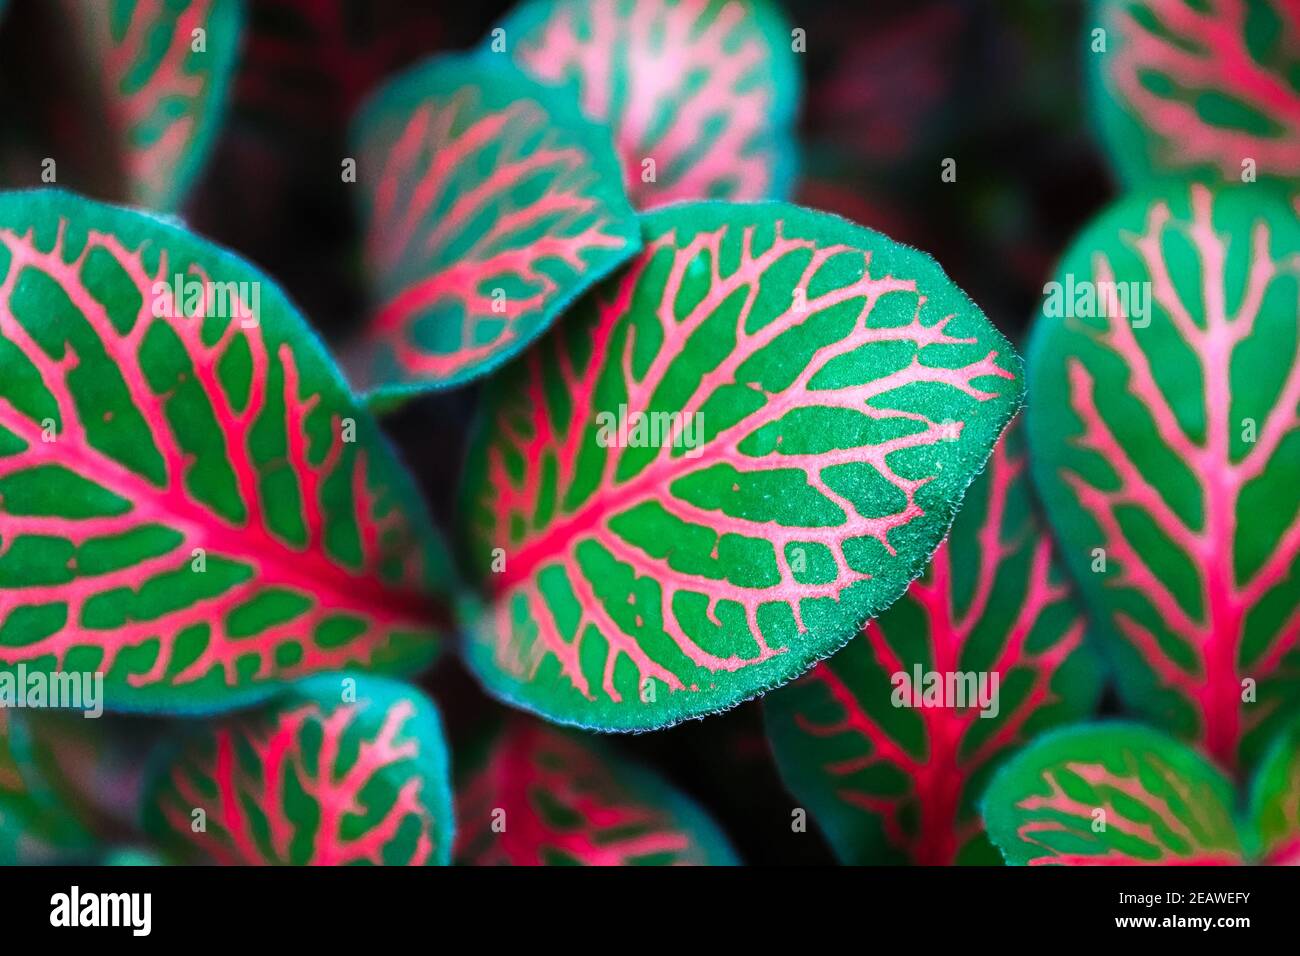 Closeup of pink veins on a fittonia houseplant Stock Photo